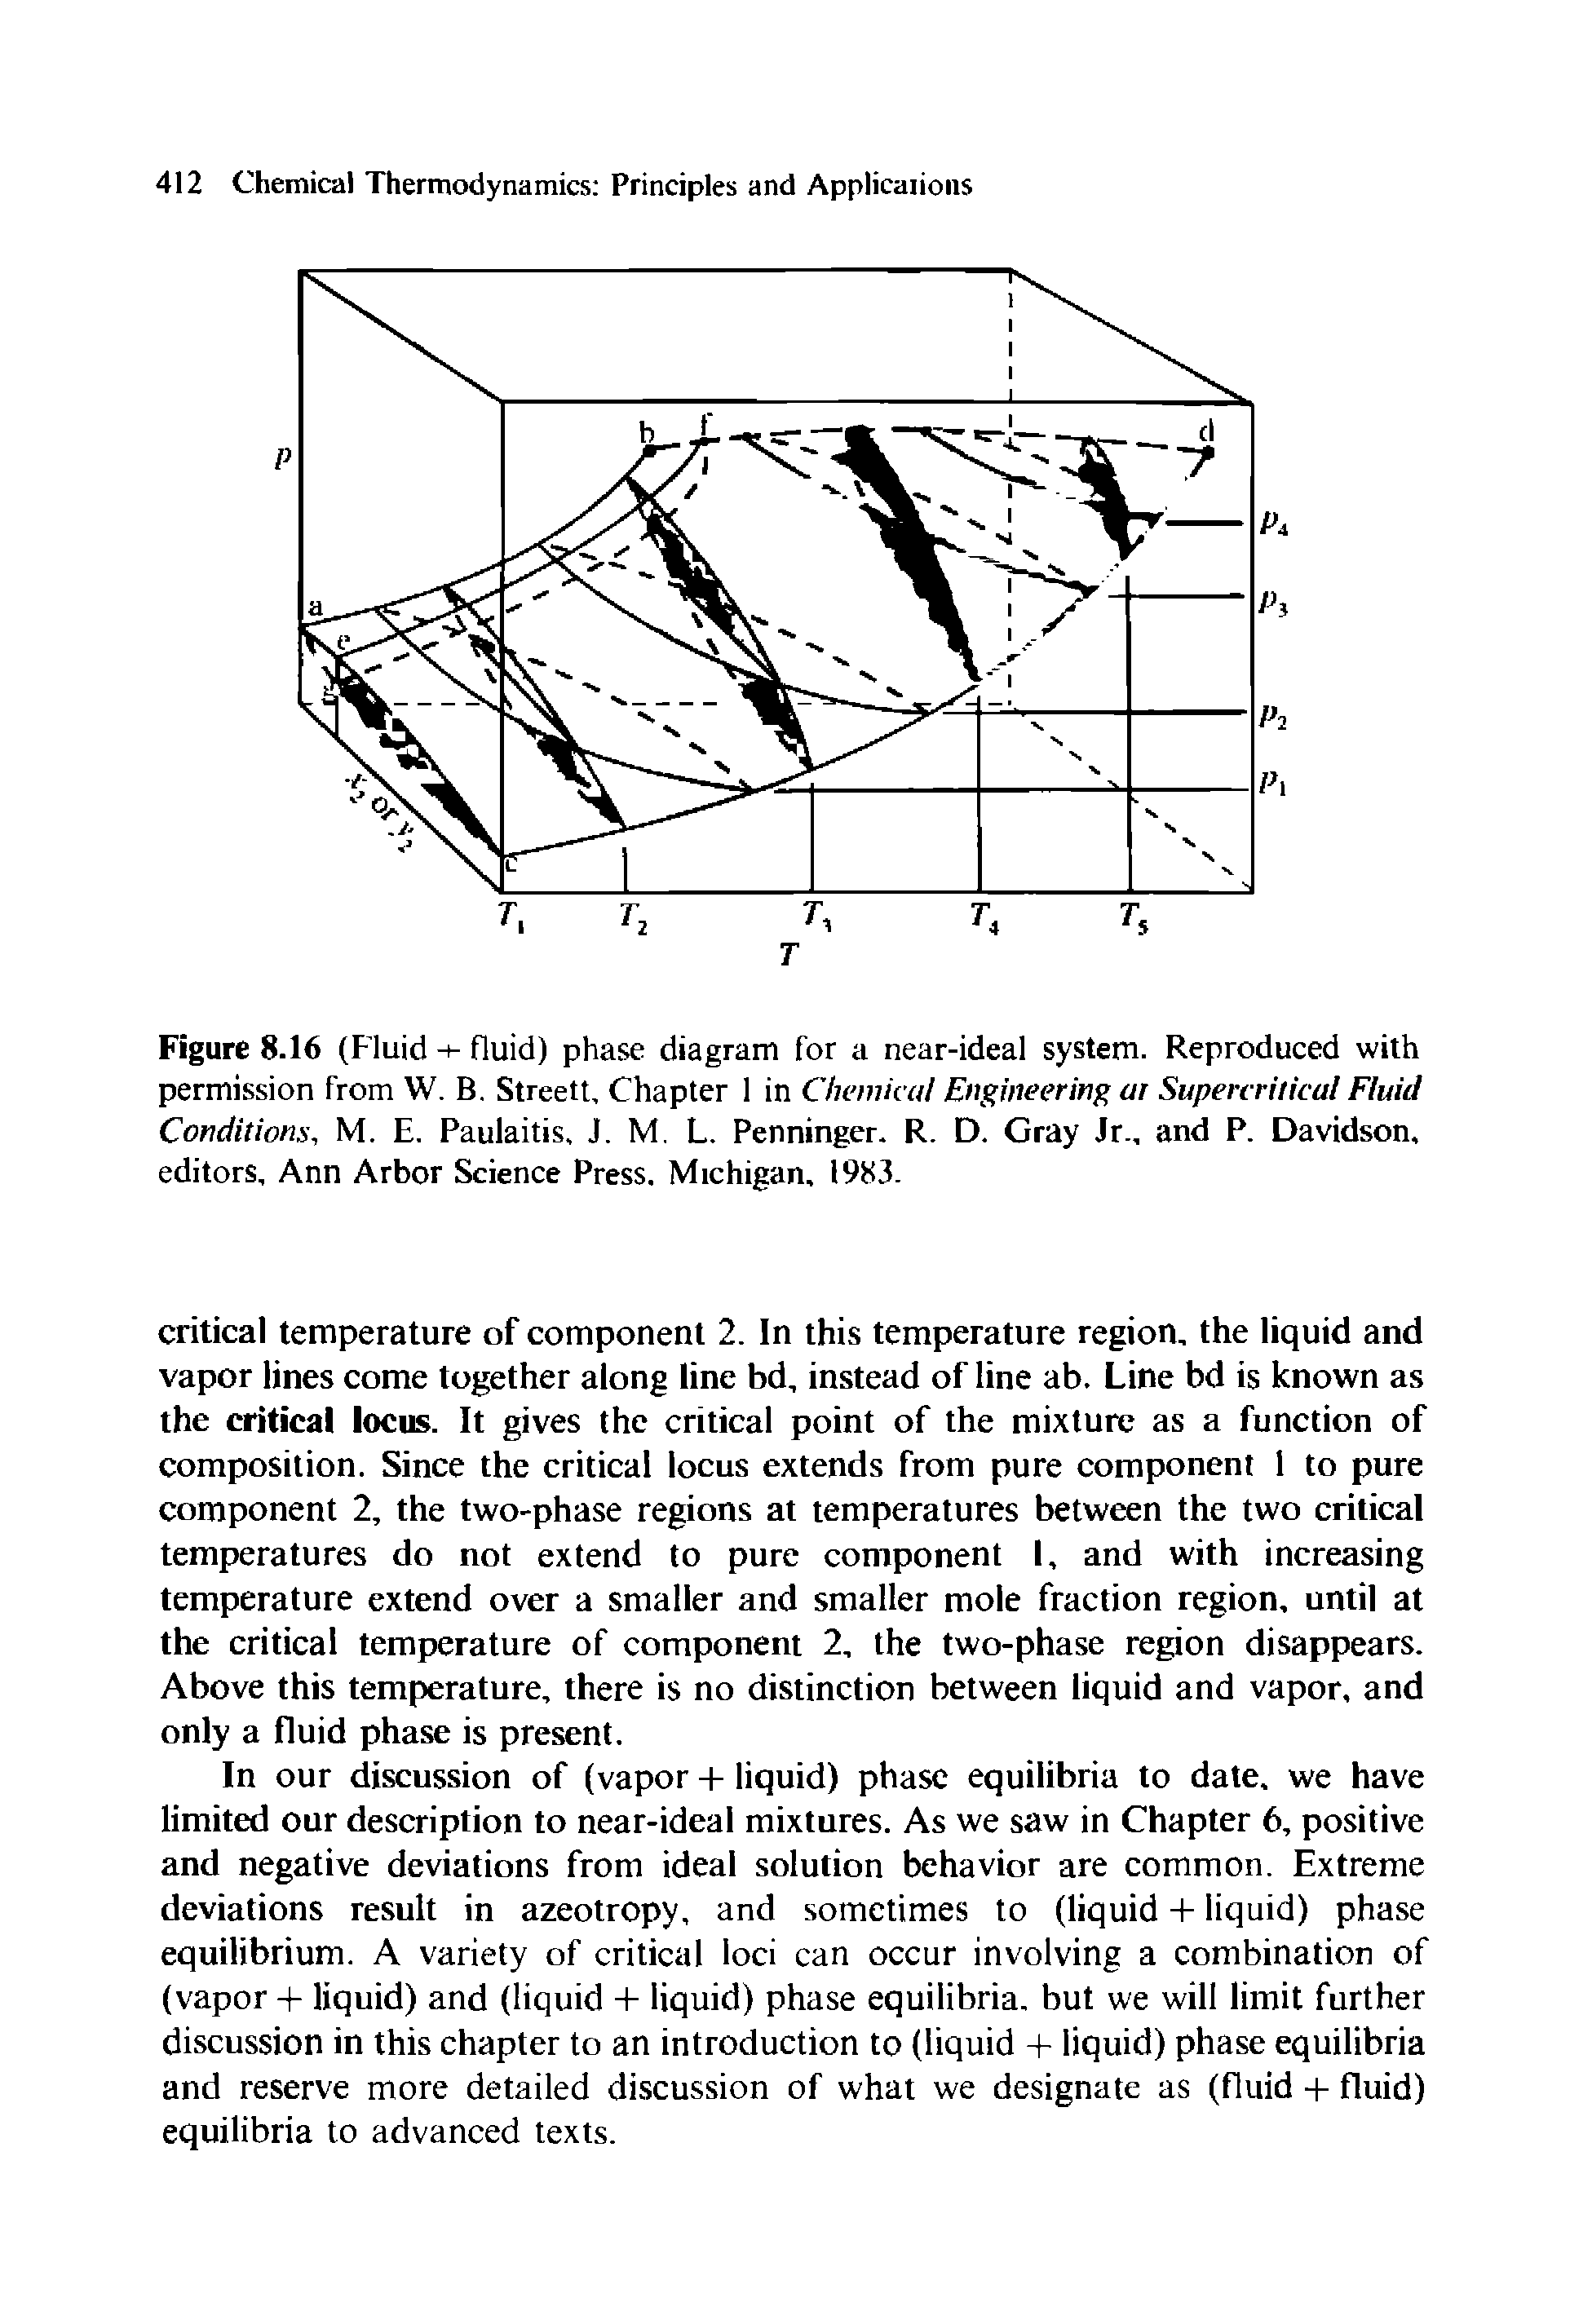 Figure 8.16 (Fluid -+- fluid) phase diagram for a near-ideal system. Reproduced with permission from W. B. Streett, Chapter 1 in Chemical Engineering ai Supercritical Fluid Conditions, M. E. Paulaitis, J. M. L. Penninger. R. D. Gray Jr., and P. Davidson, editors, Ann Arbor Science Press. Michigan, 1983.